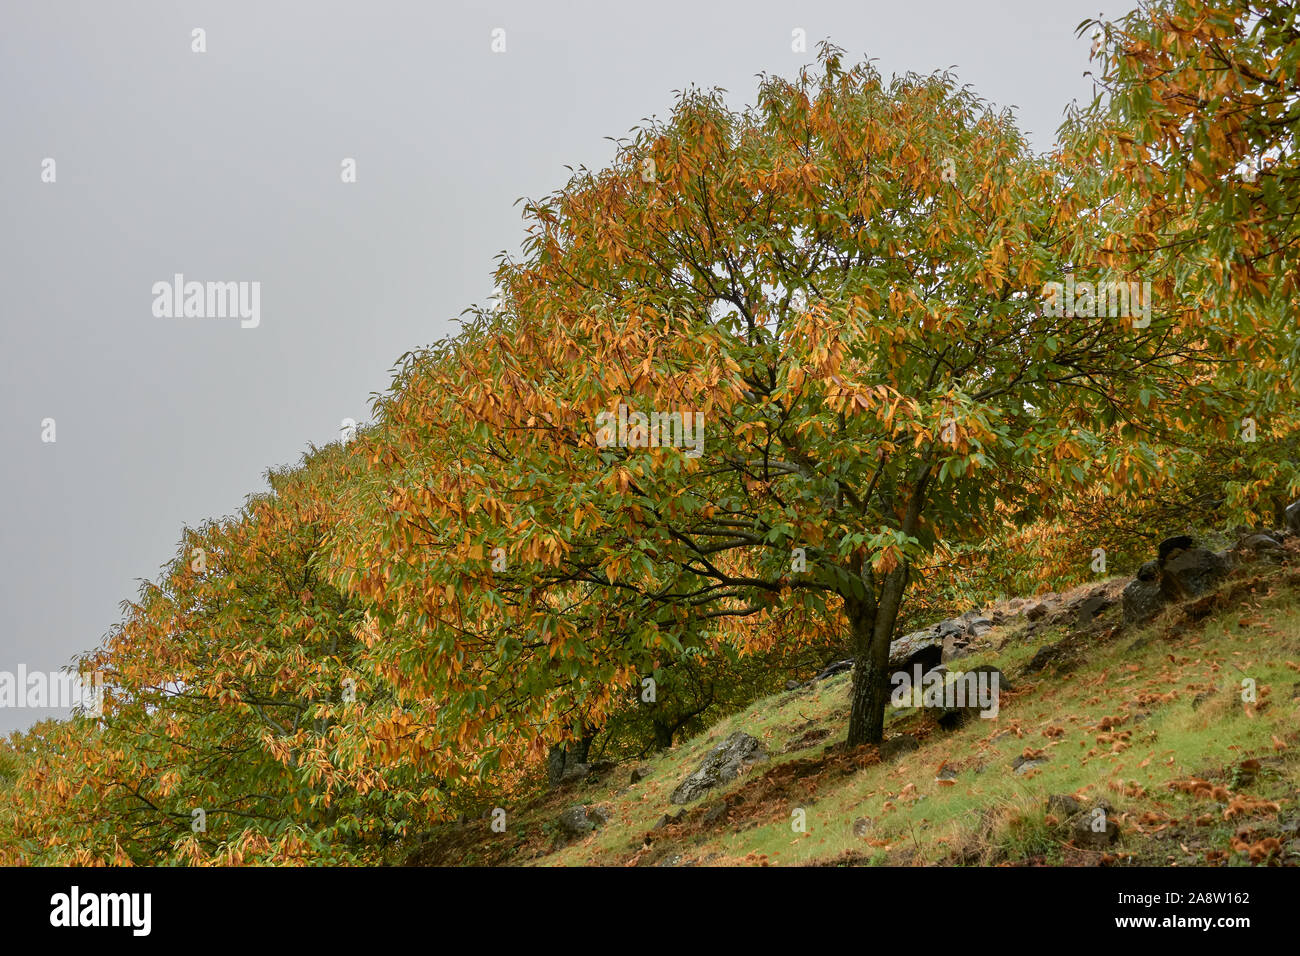 Chestnut forest and chestnut fruits in the Genal Valley, province of Malaga. Spain Stock Photo